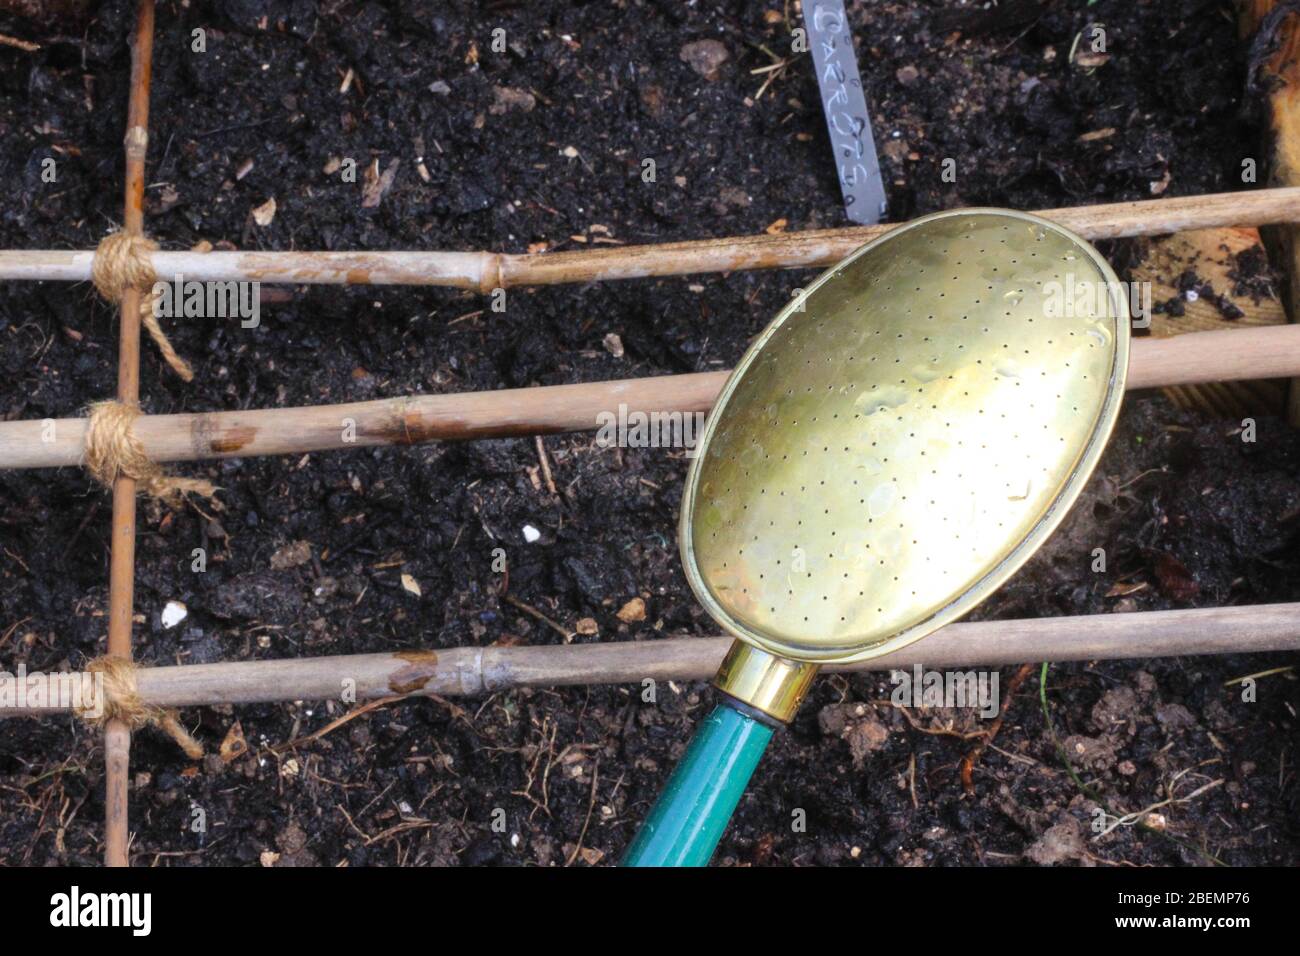 cane protection over raised bed and metal watering can Stock Photo